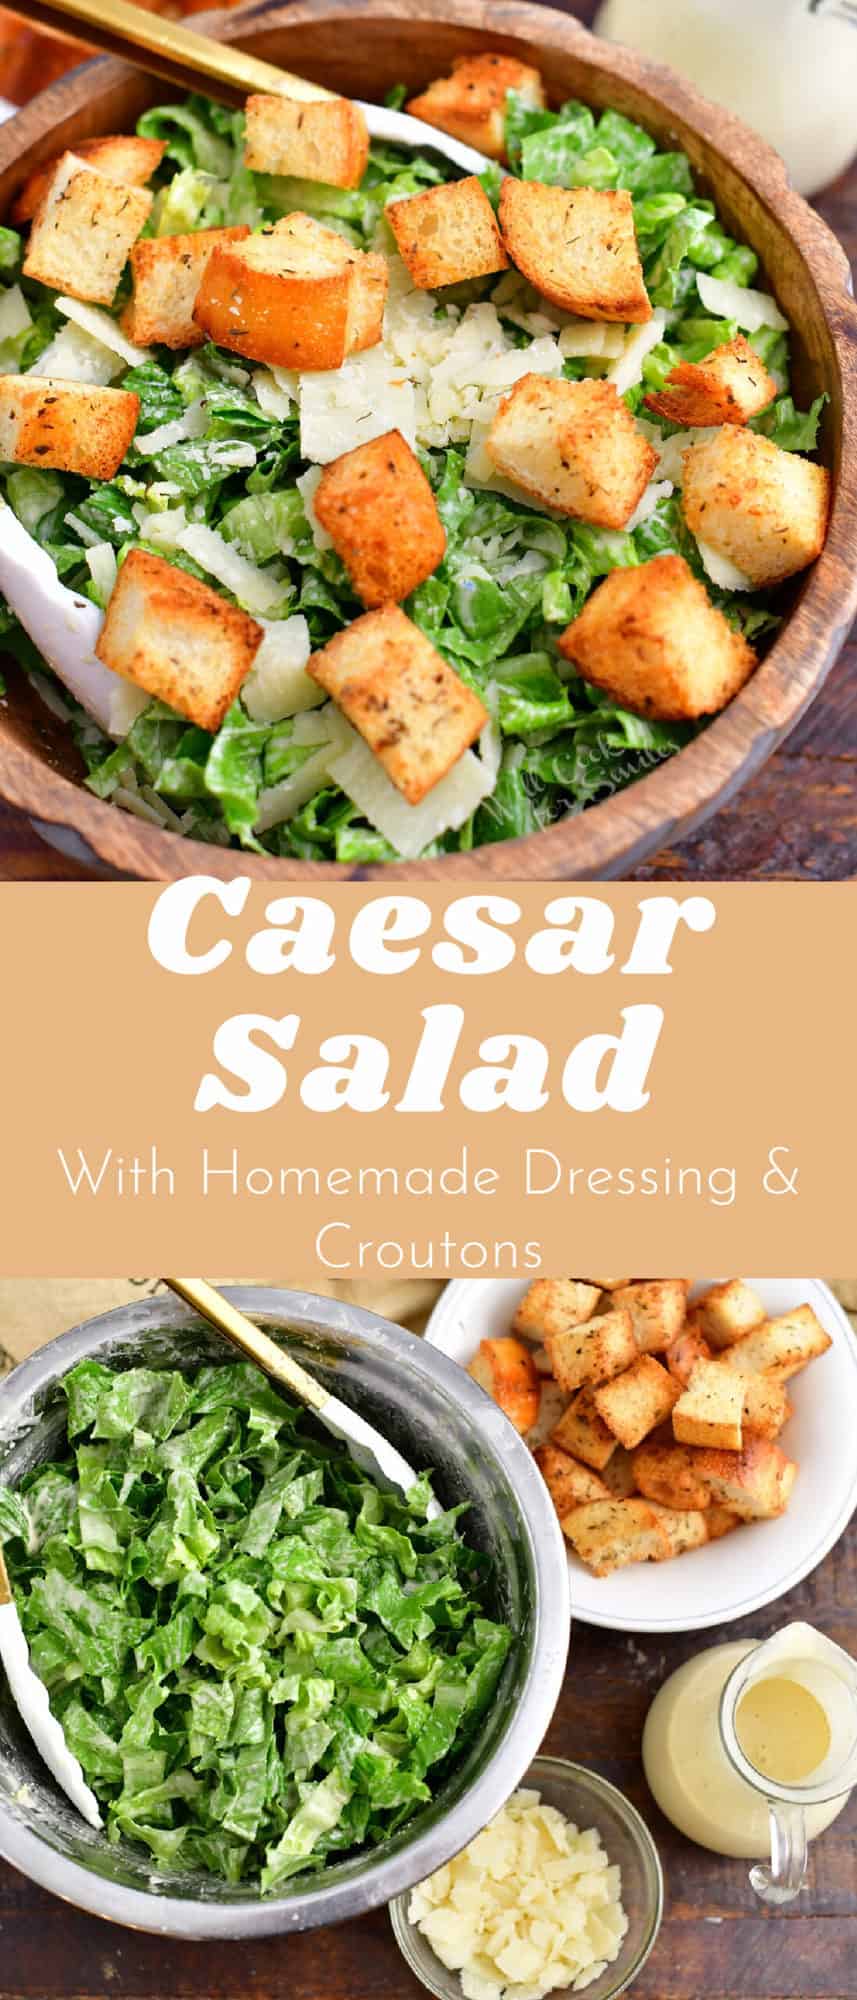 titled Pinterest image (and shown): Caesar Salad with Homemade Dressing and Croutons